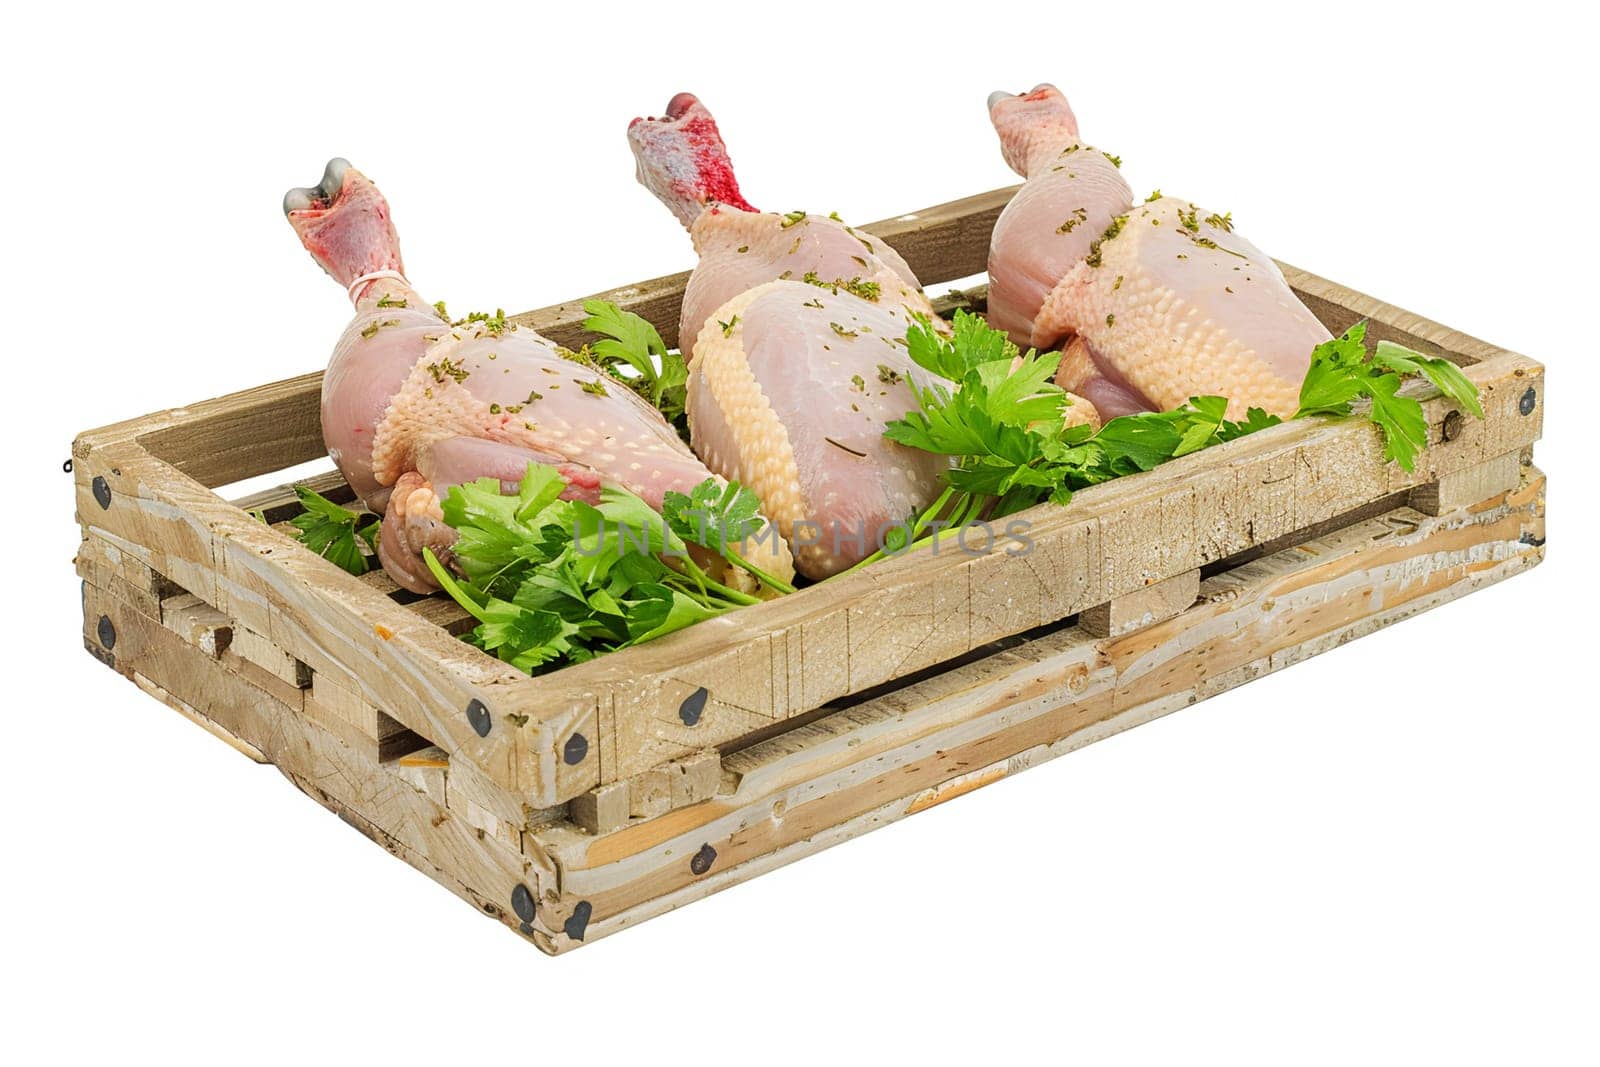 Three fresh chicken legs seasoned with herbs wooden crate isolated. Perfect for culinary projects focusing on homemade, nutritious meals.